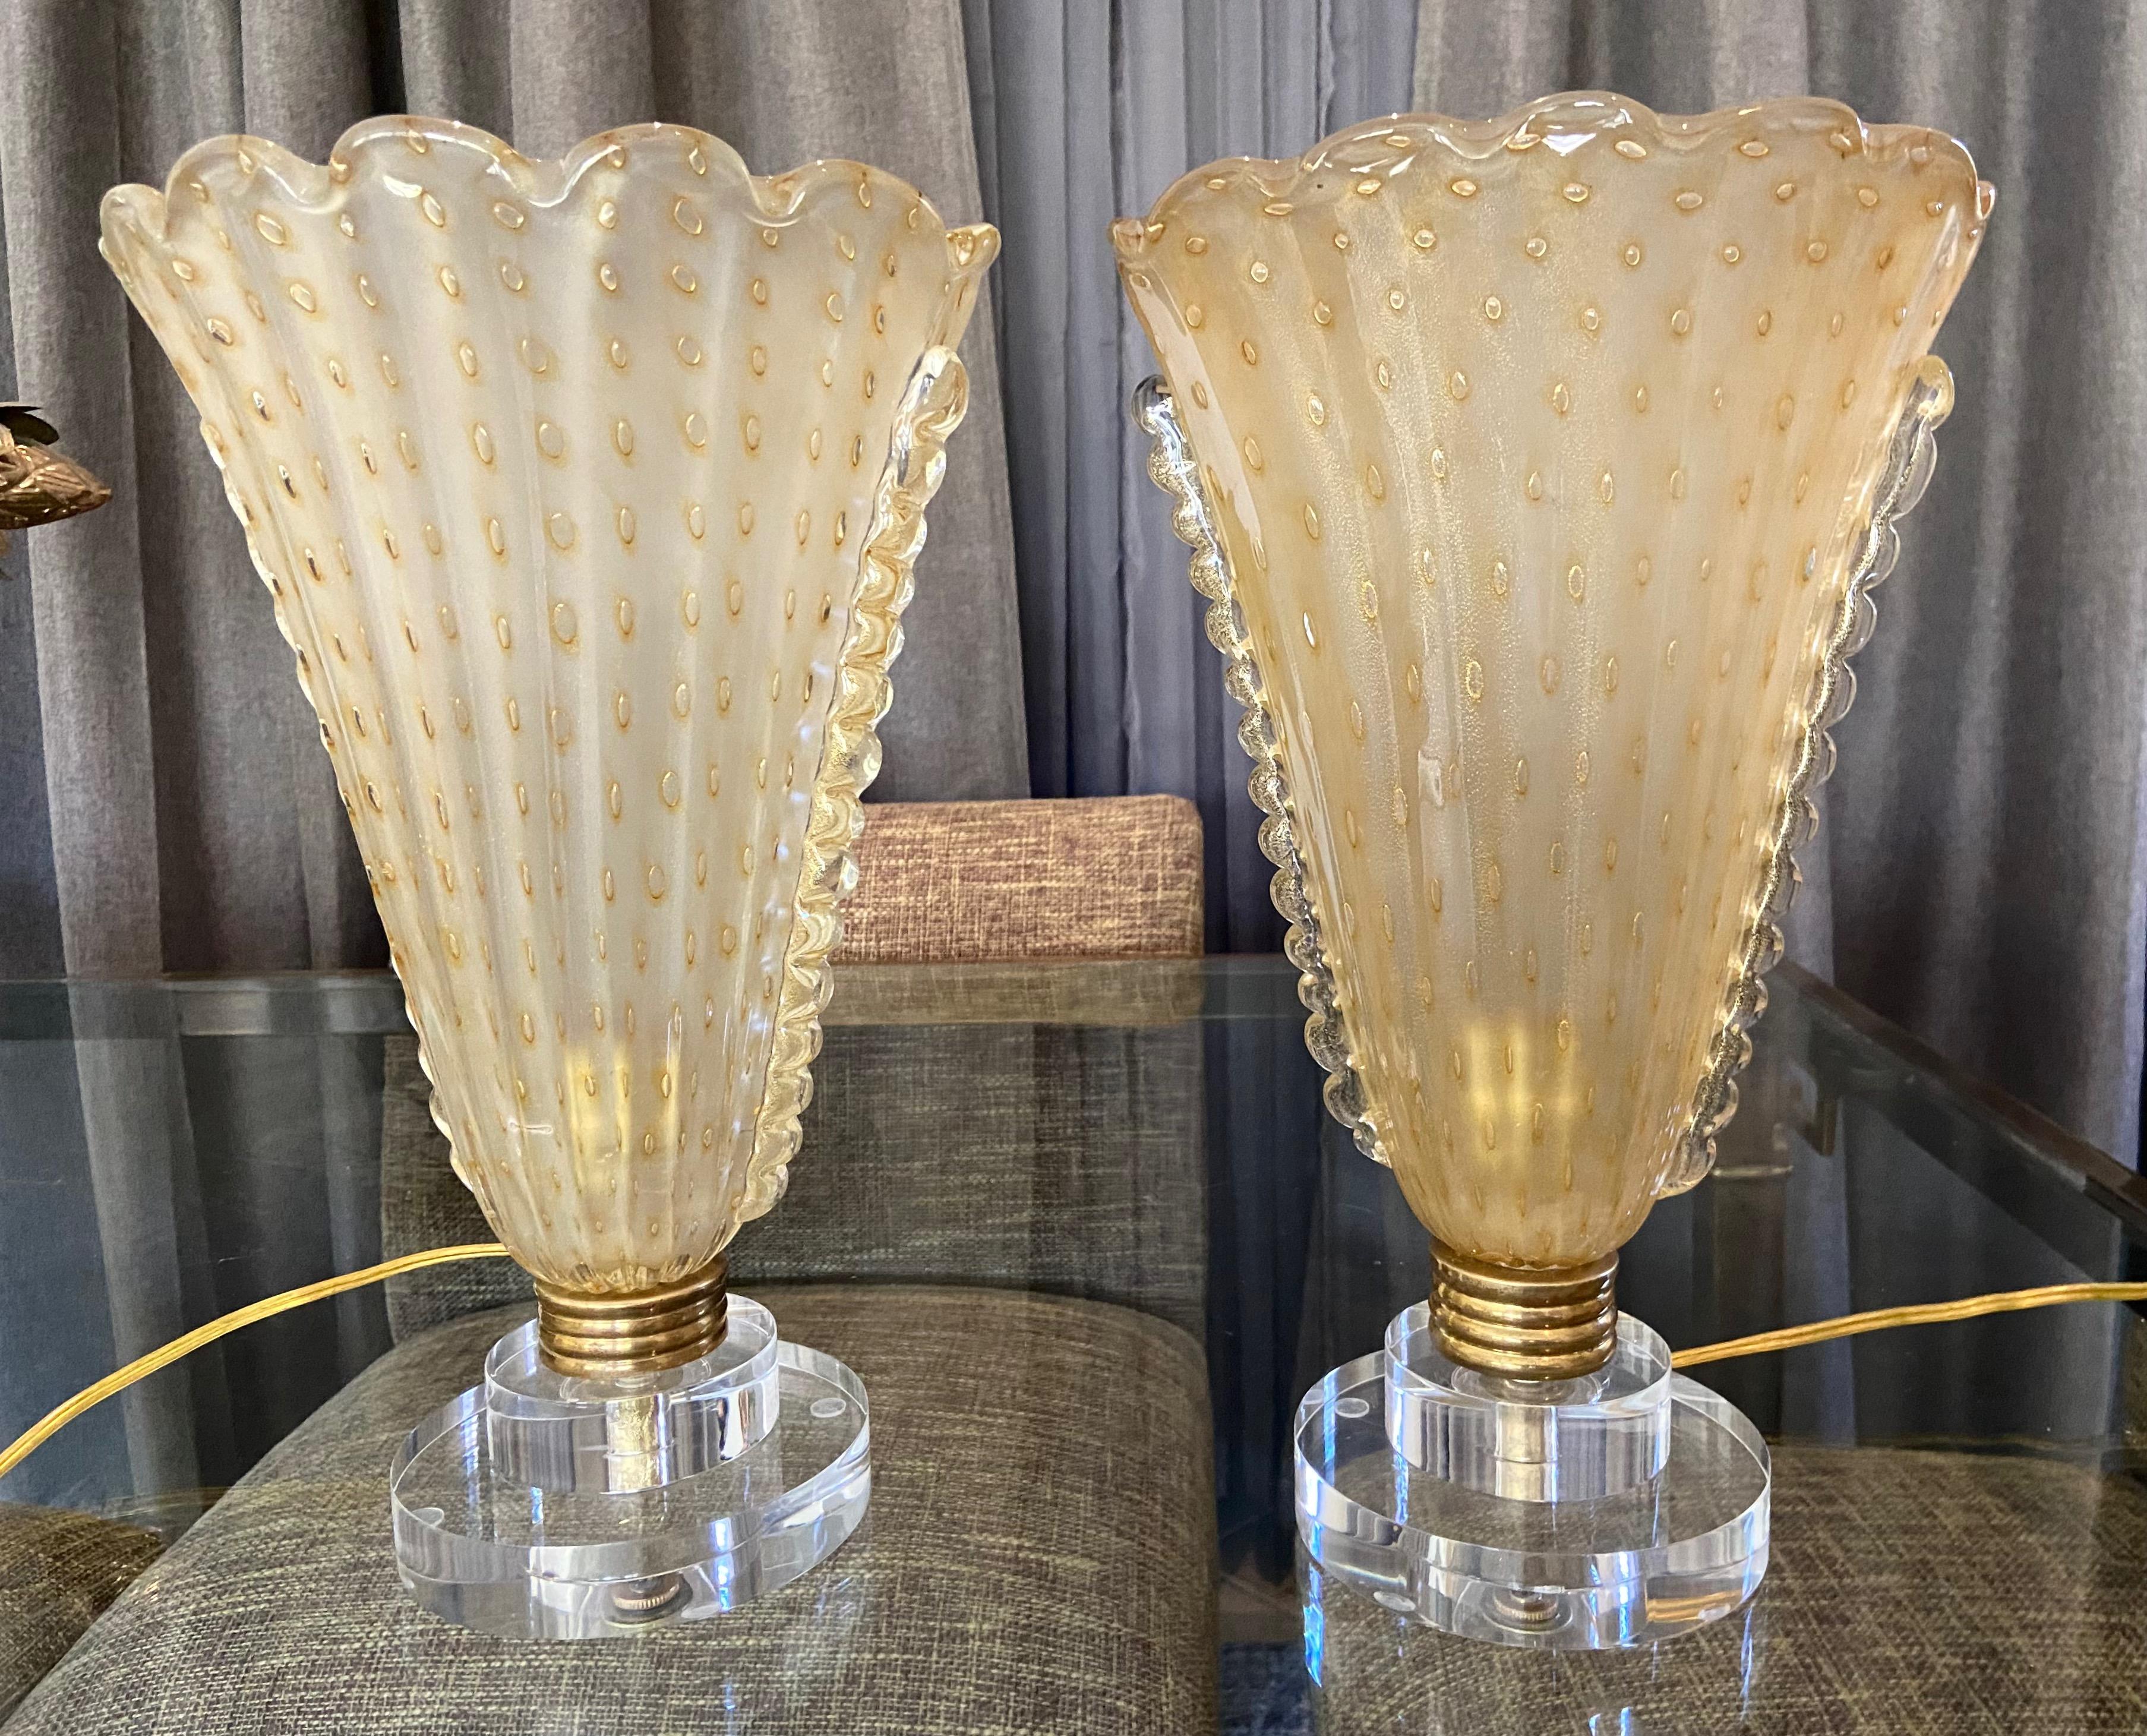 Pair of Murano art glass torchere mantel or table lamps. Italian hand blown yellow colored shades with bullicante bubbles and gold inclusions. Mounted on new acrylic bases with new brass sockets and twisted rayon cords attached with dimmers.